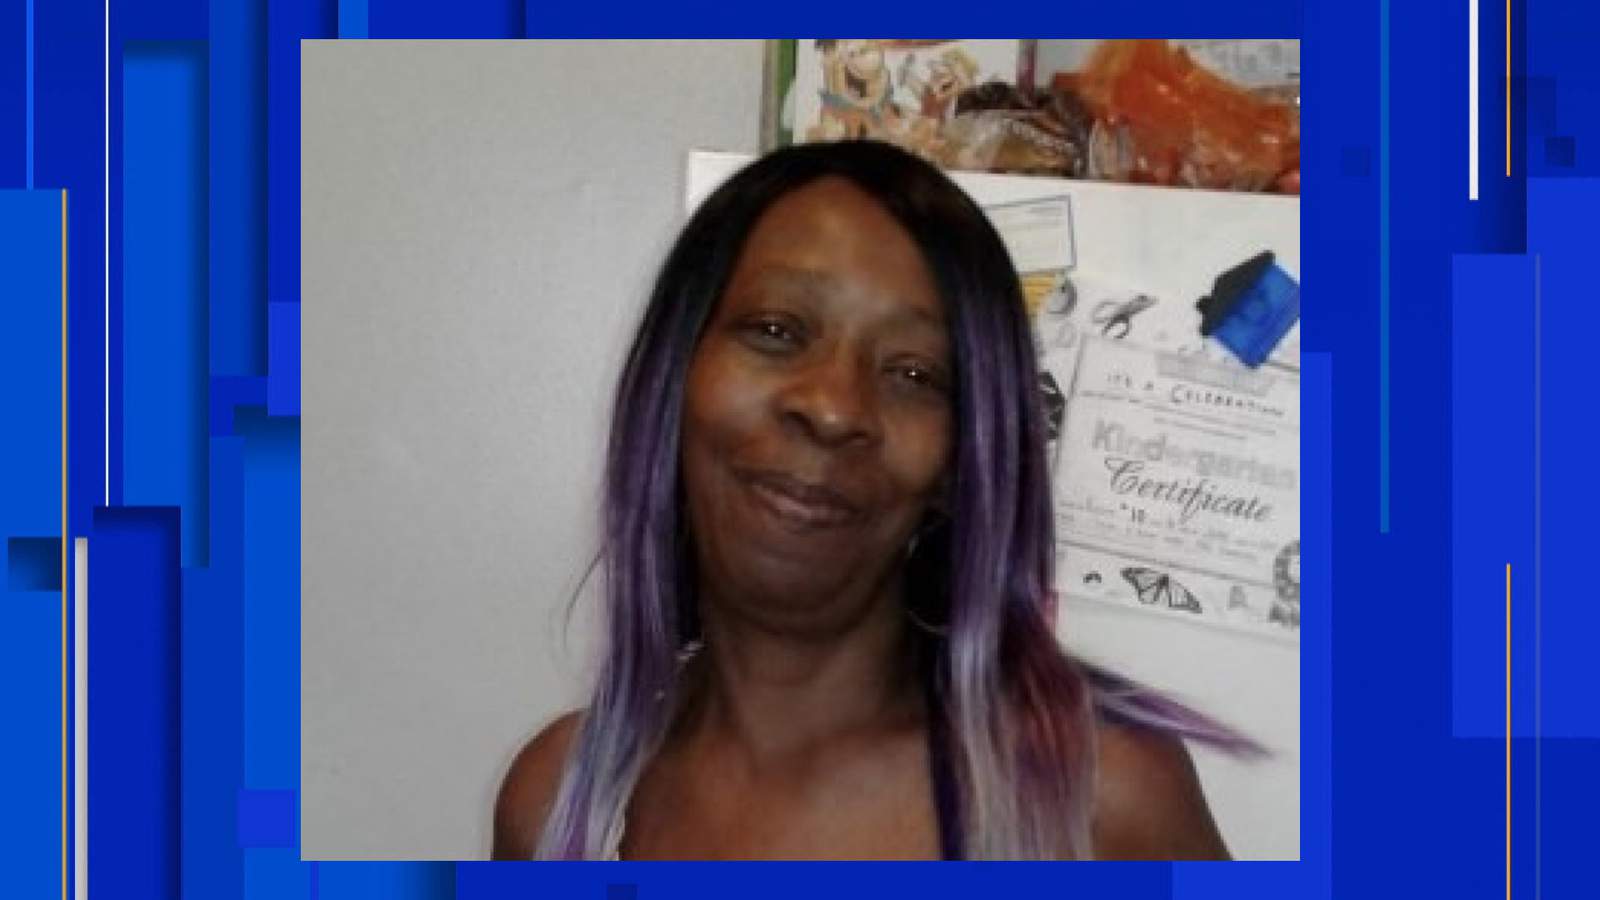 58-year-old woman missing for more than a week found safe, Detroit police say